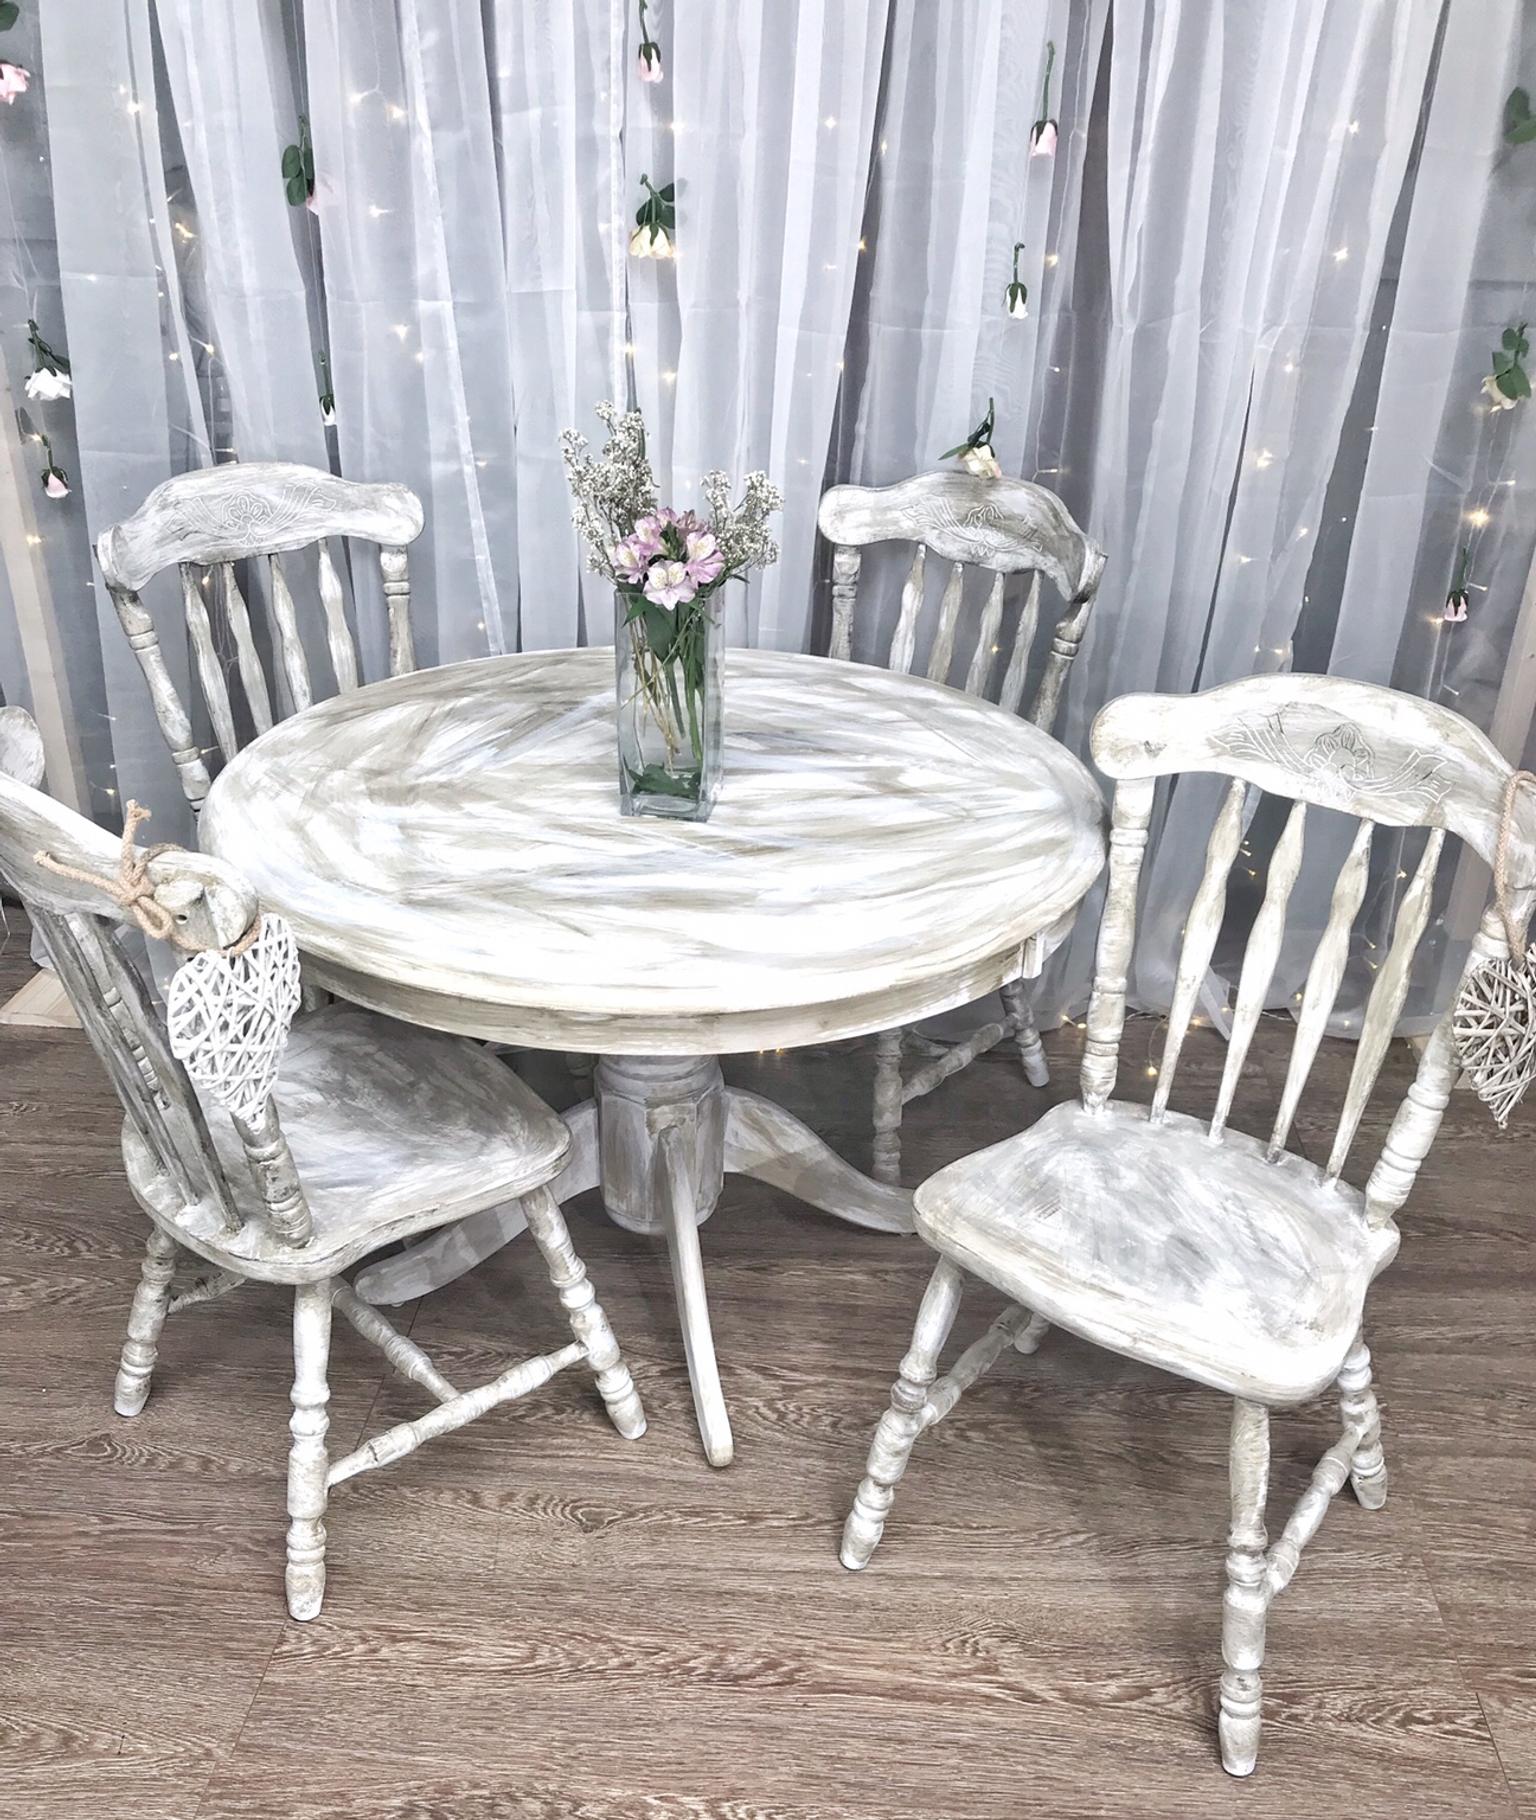 Shabby Chic Round Dining Table 4, Shabby Chic Round Kitchen Table And Chairs